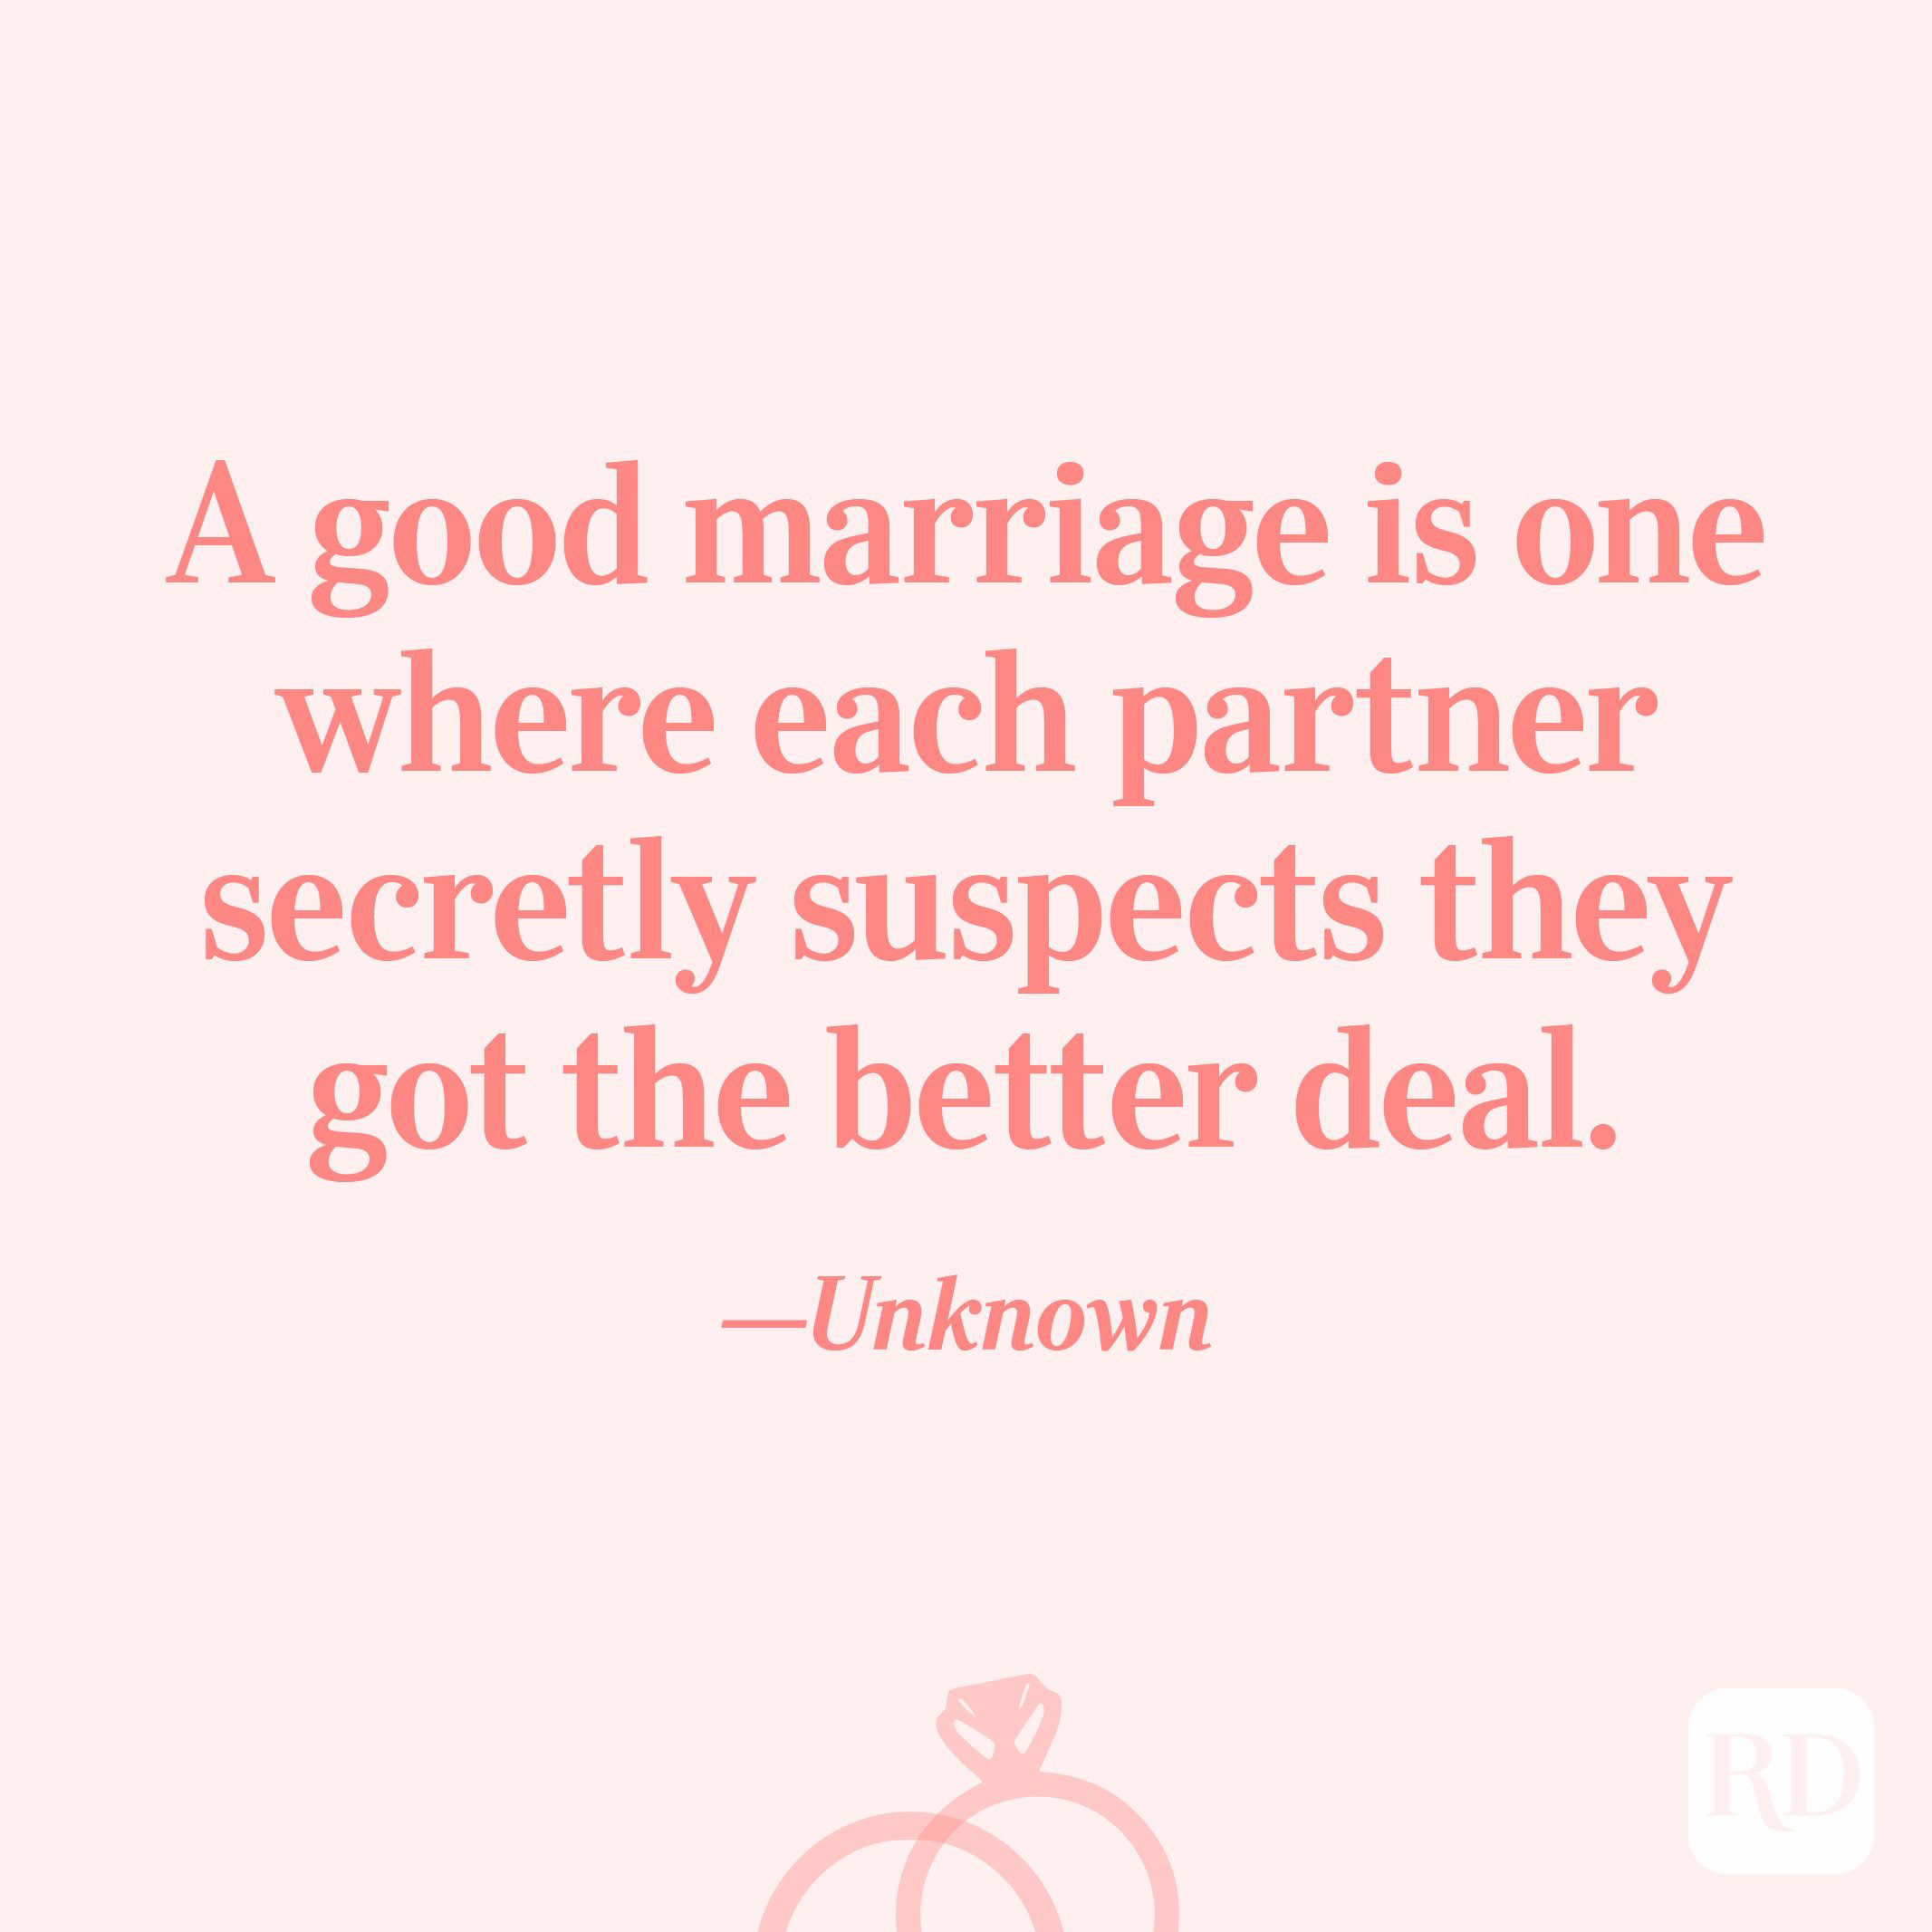 32 Marriage Quotes To Share With The Happy Couple 